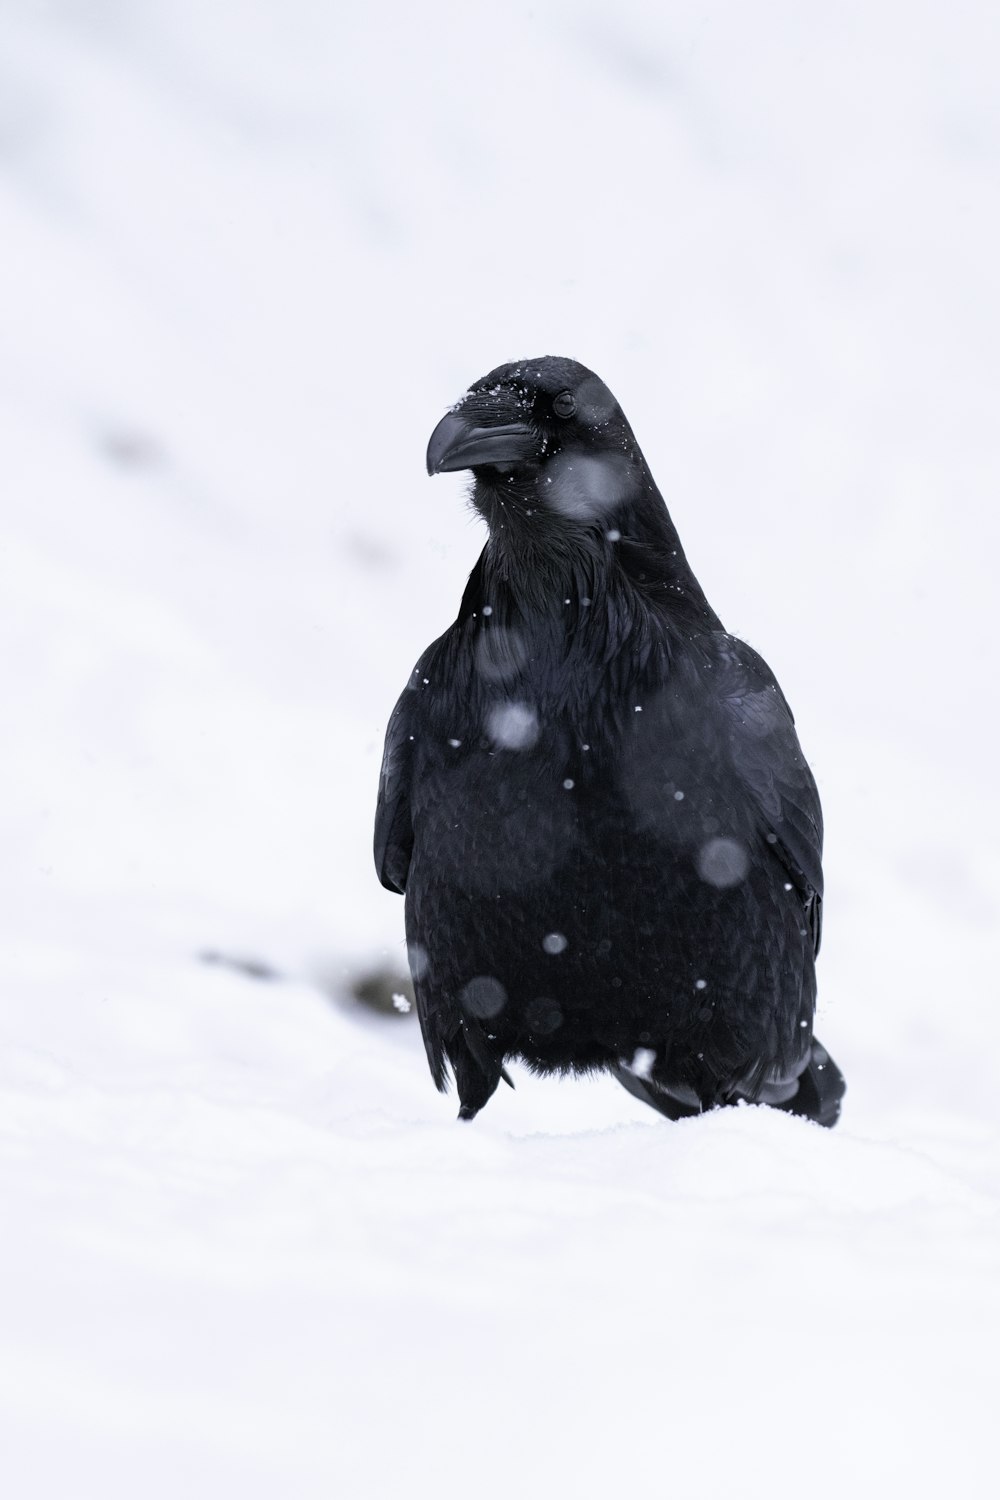 a large black bird sitting on top of a snow covered ground